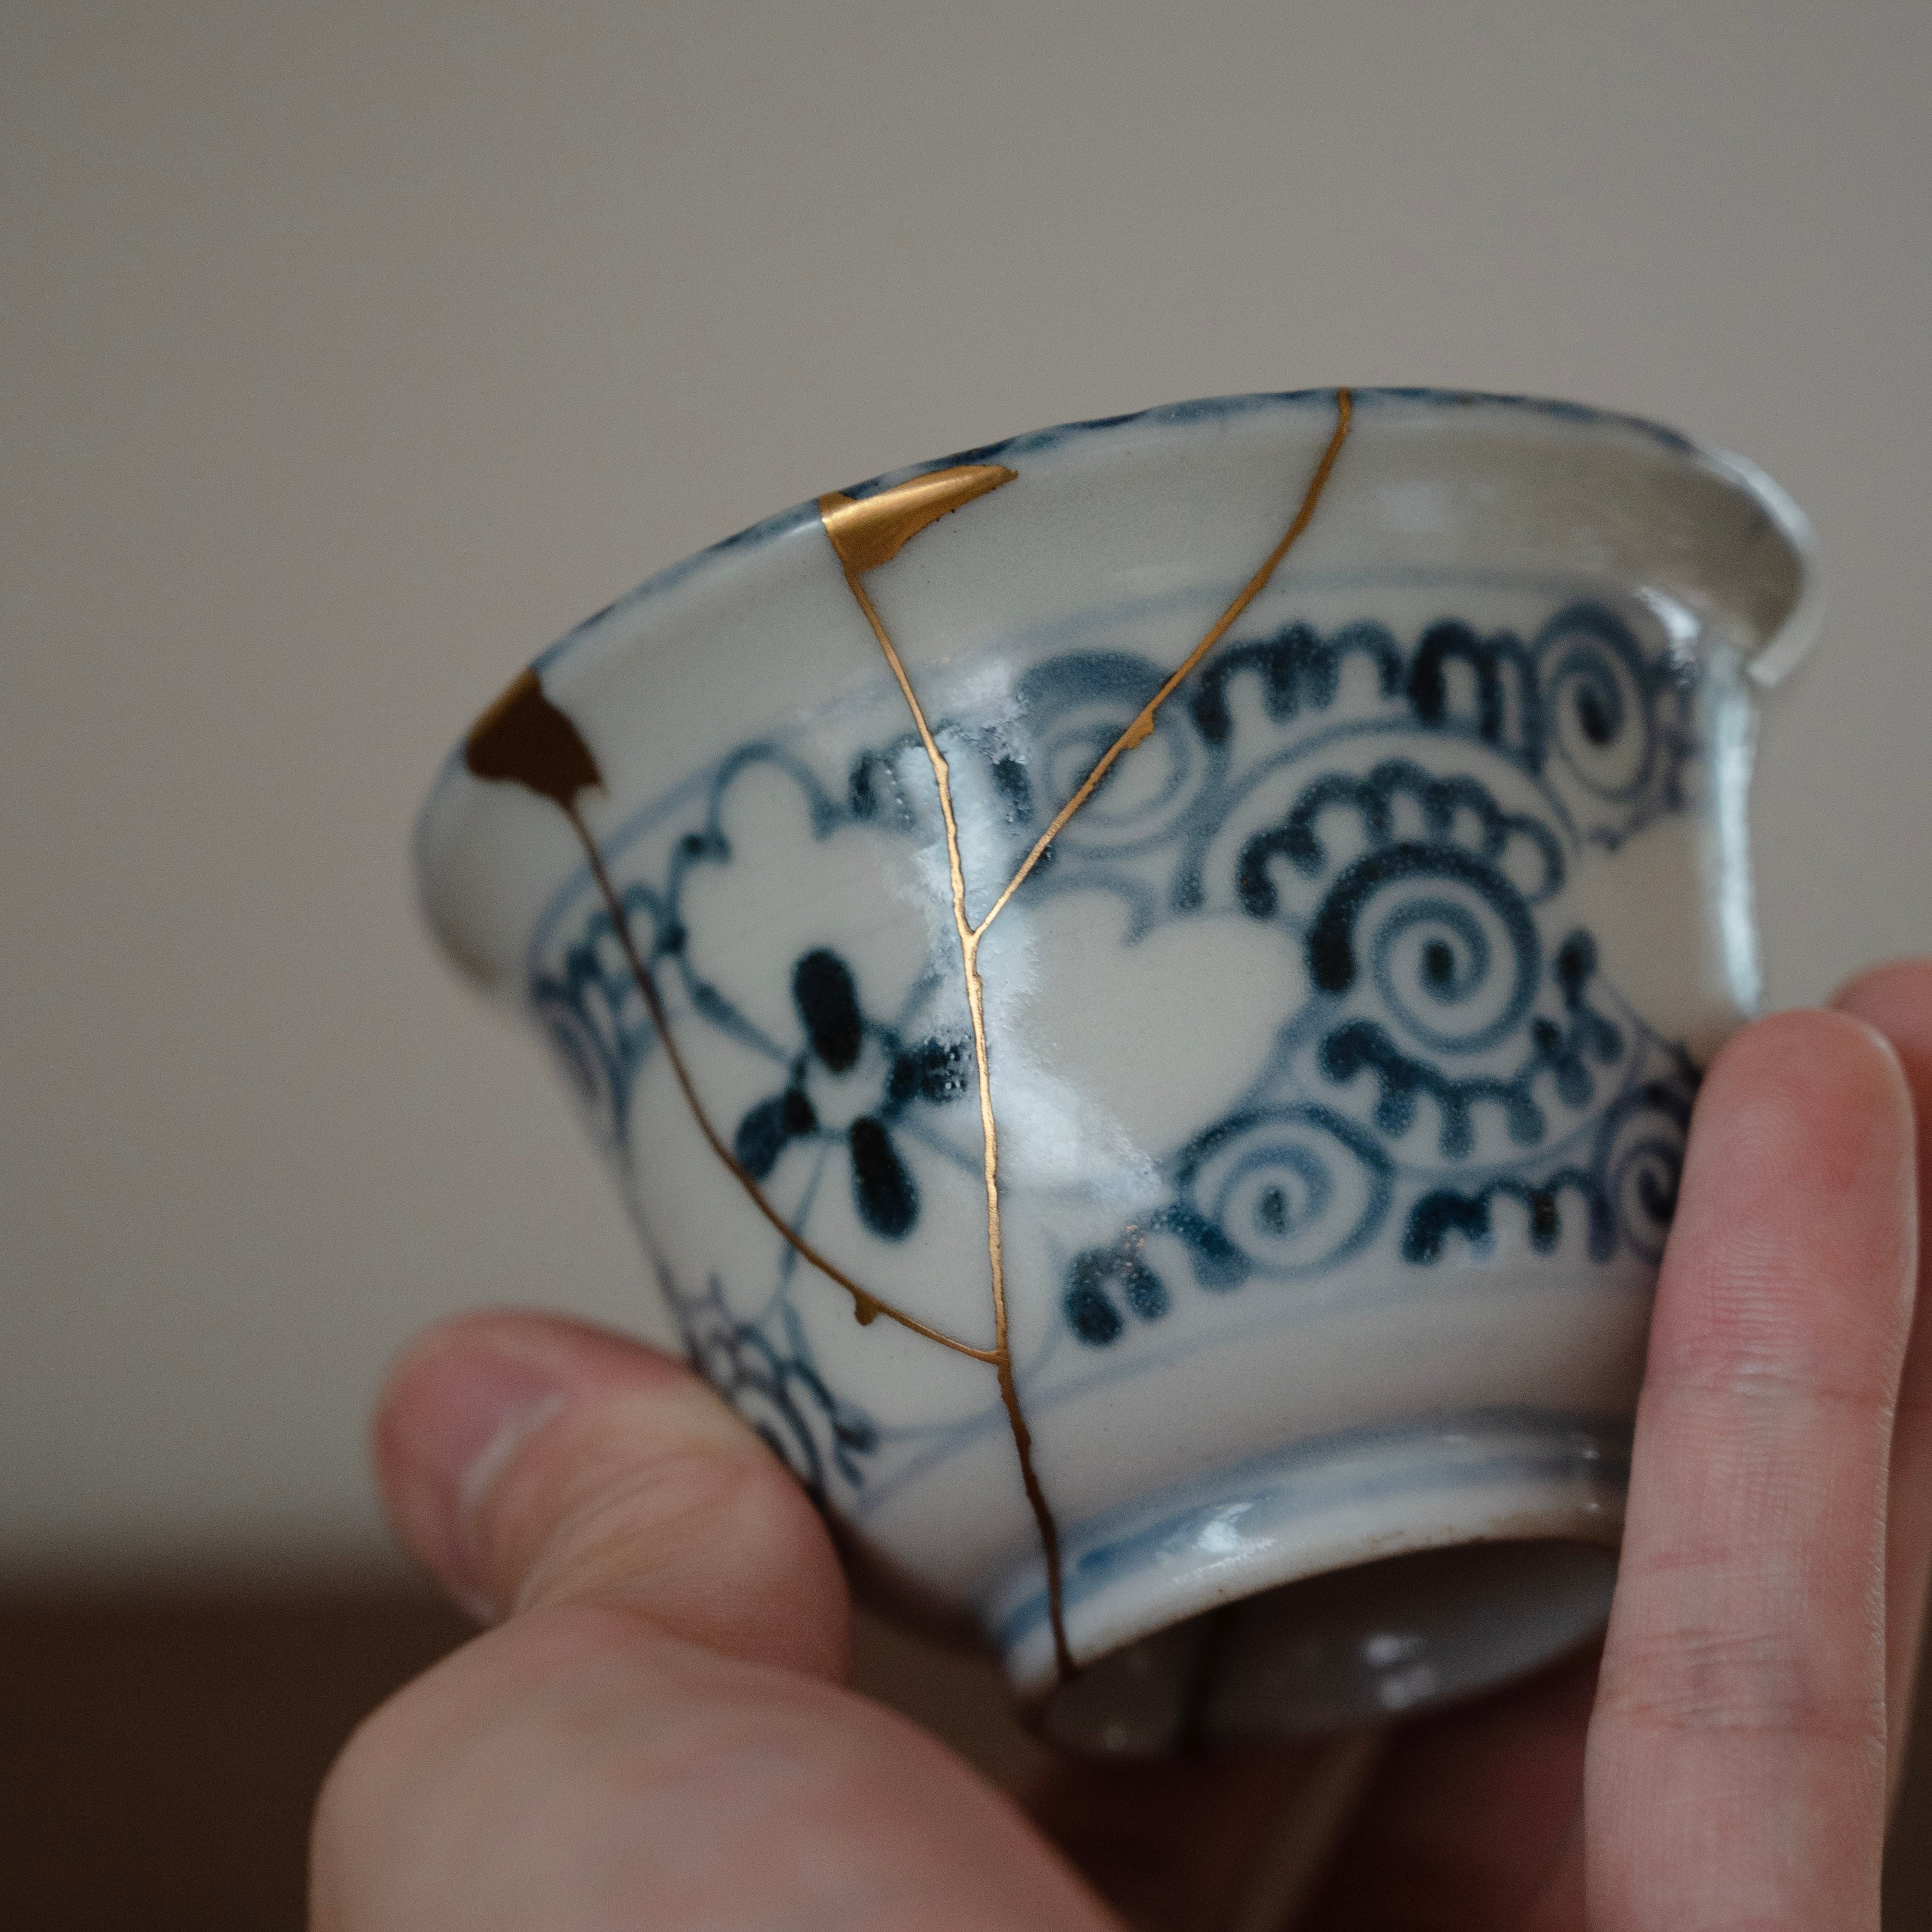 Japanese antique cup with Kintsugi